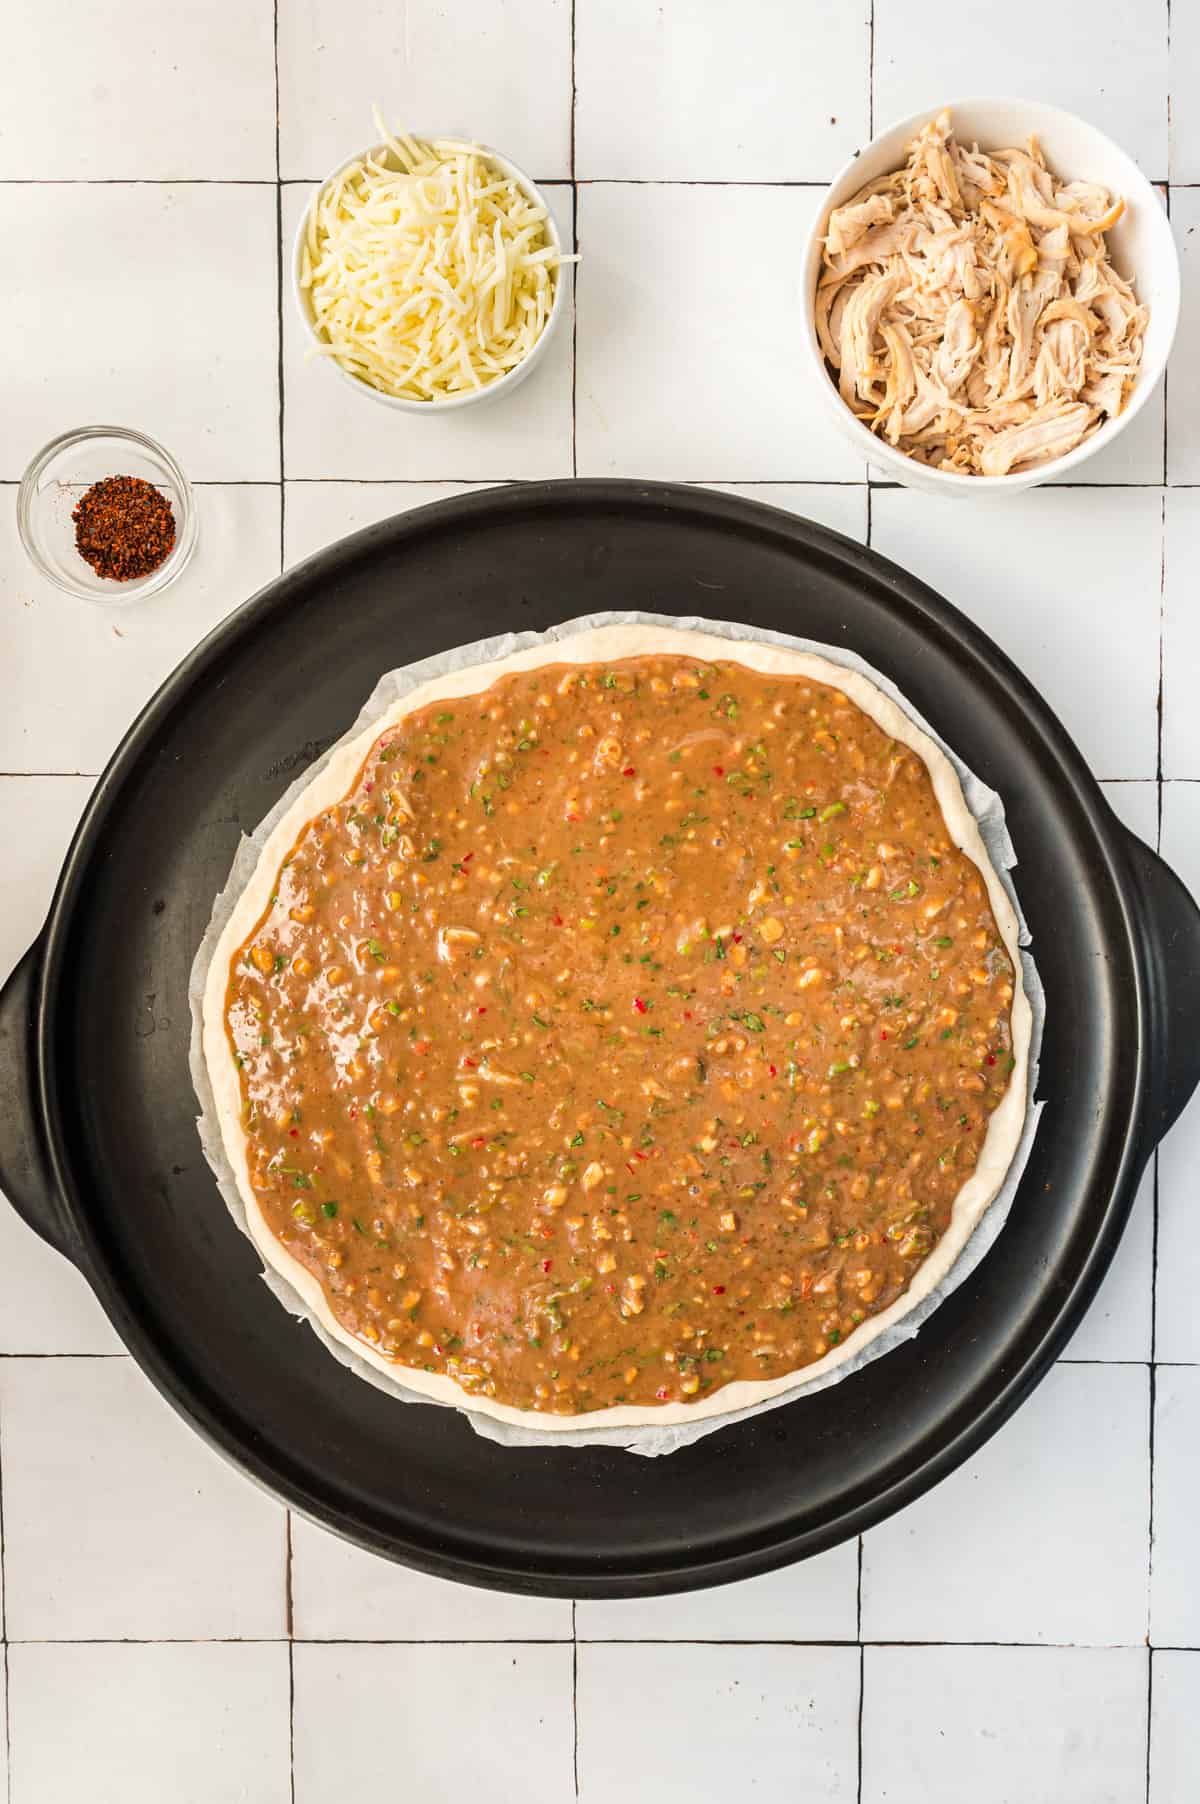 An unbaked pizza topped with peanut sauce.